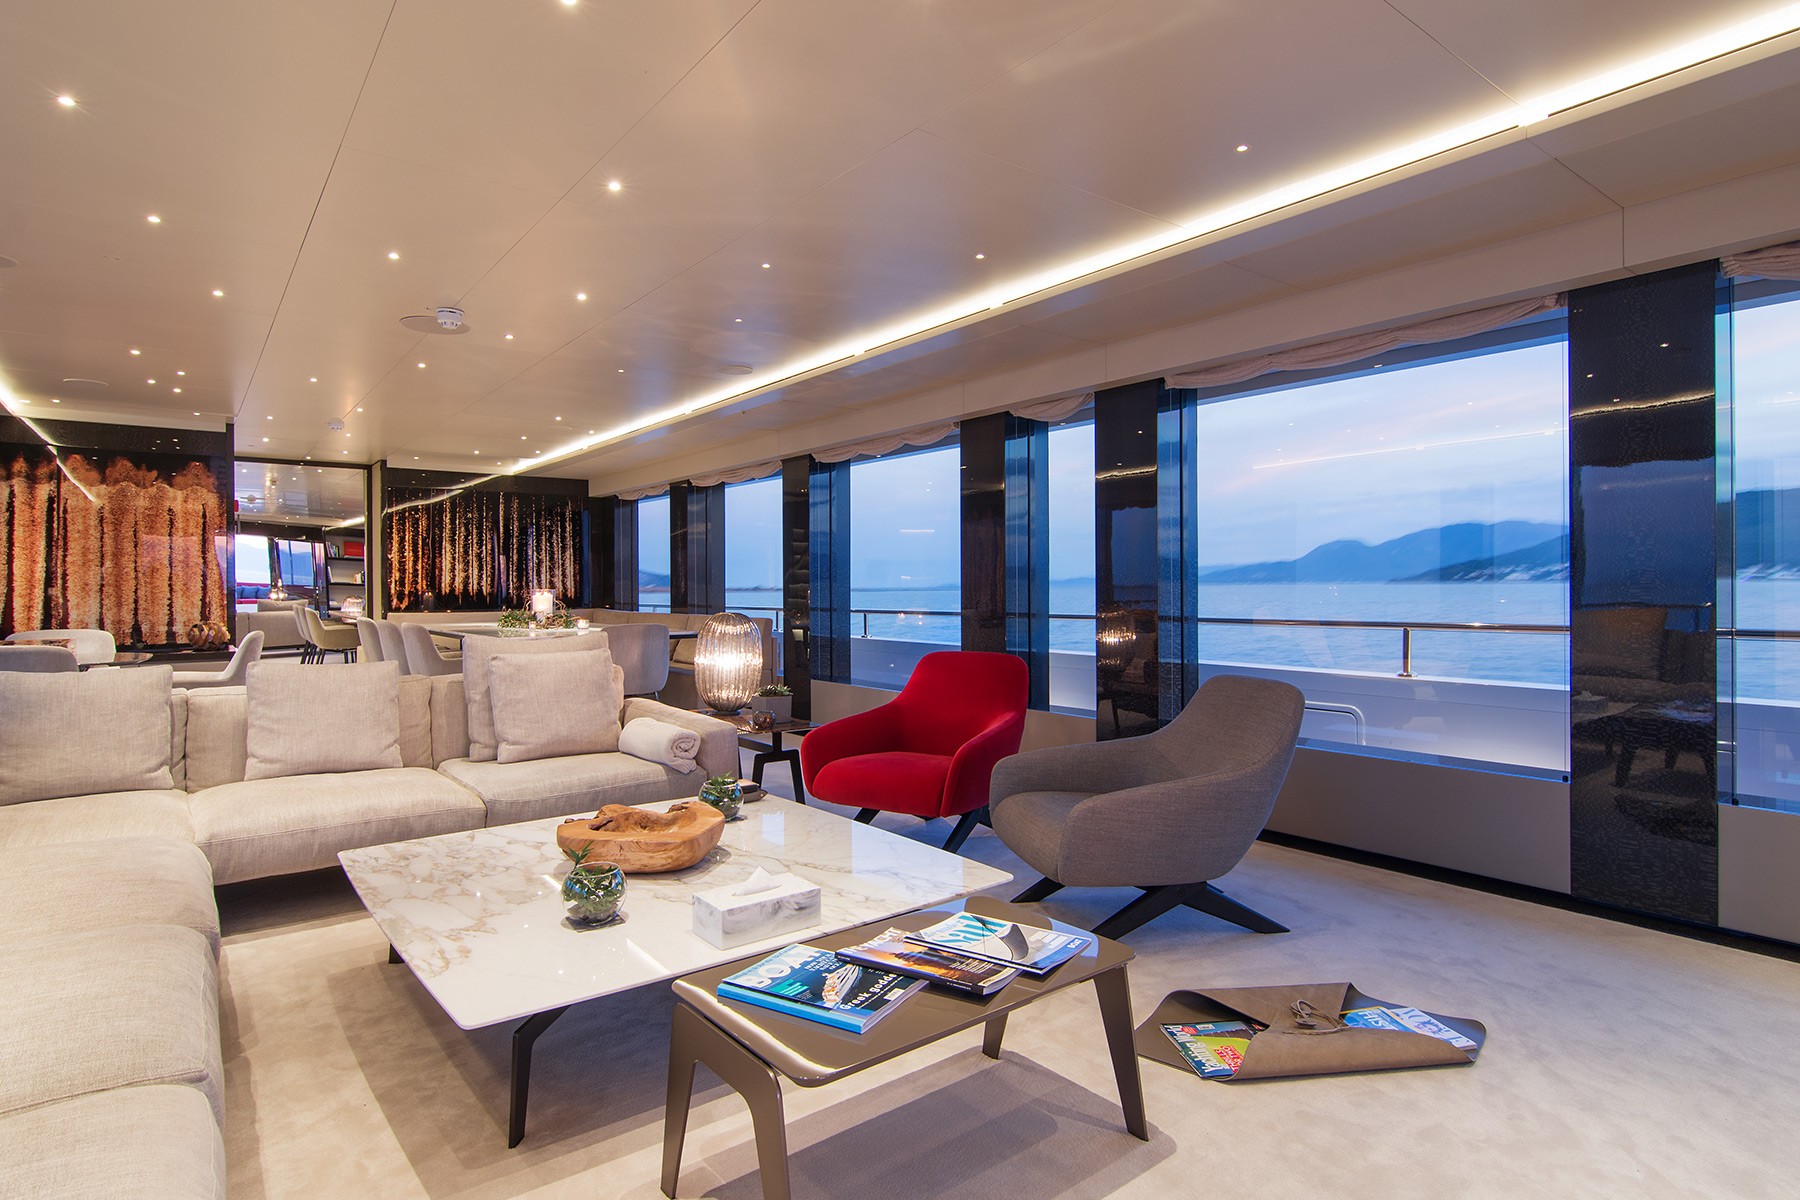 Private Motor Yacht Charter Lounge with fine dining - High Point Yachting